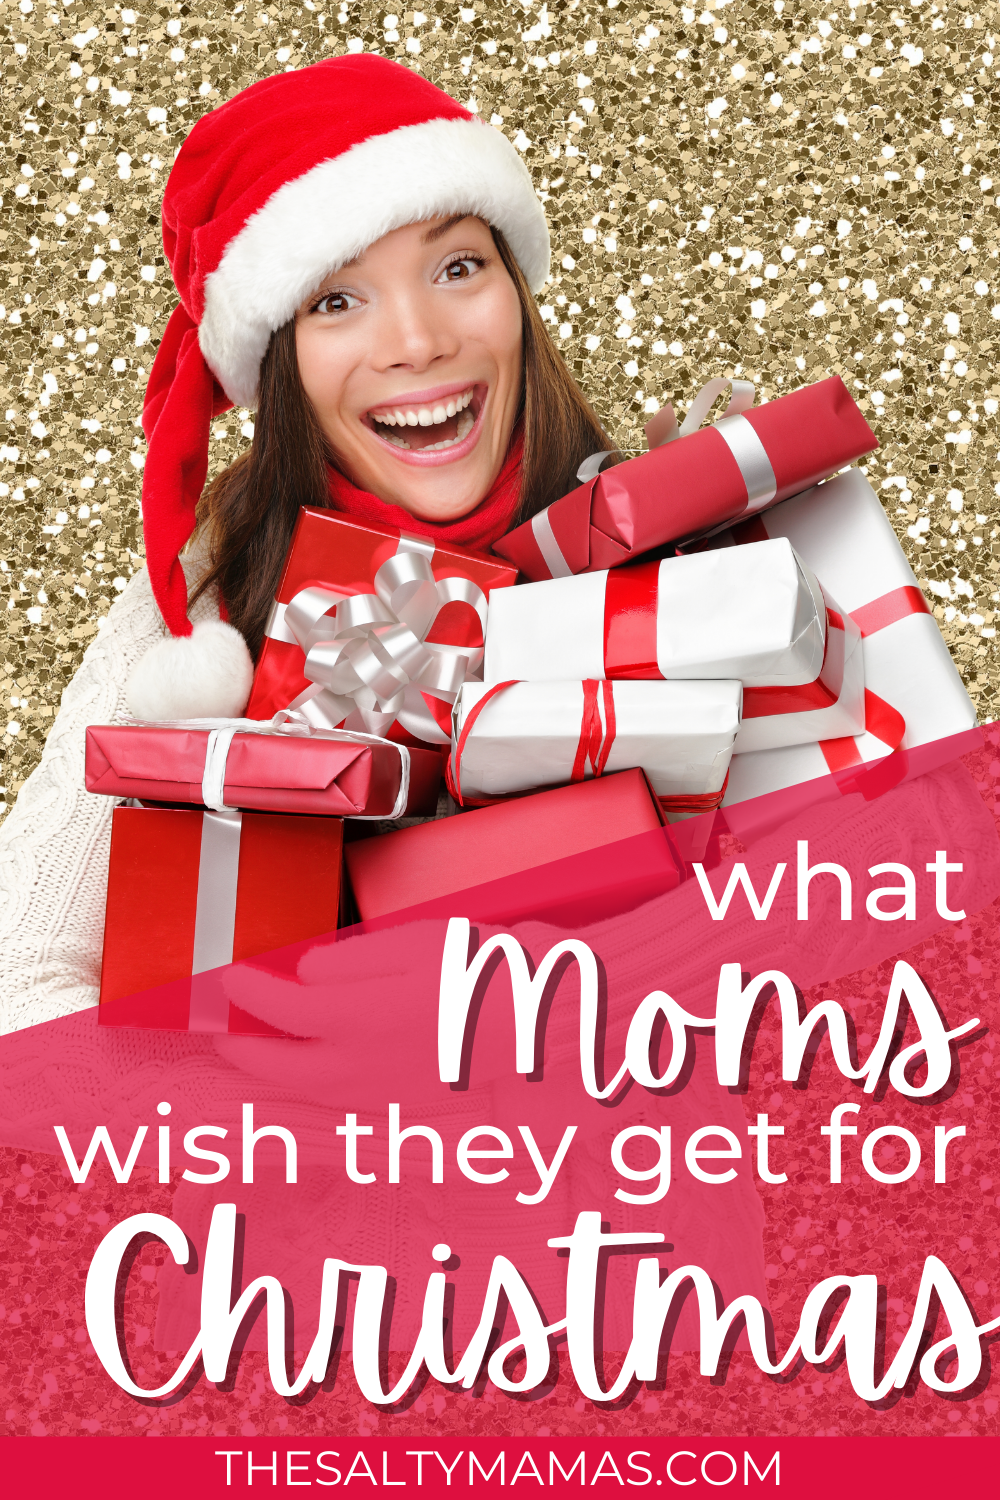 mom holding presents; text: what moms wish they got for christmas